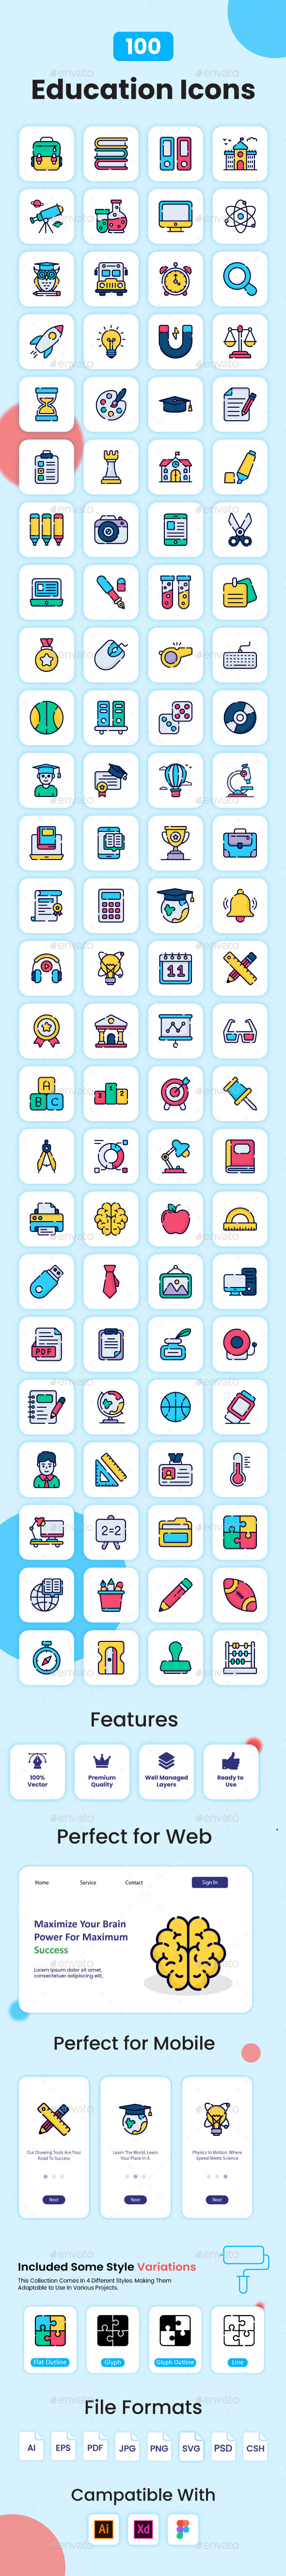 [DOWNLOAD]Education